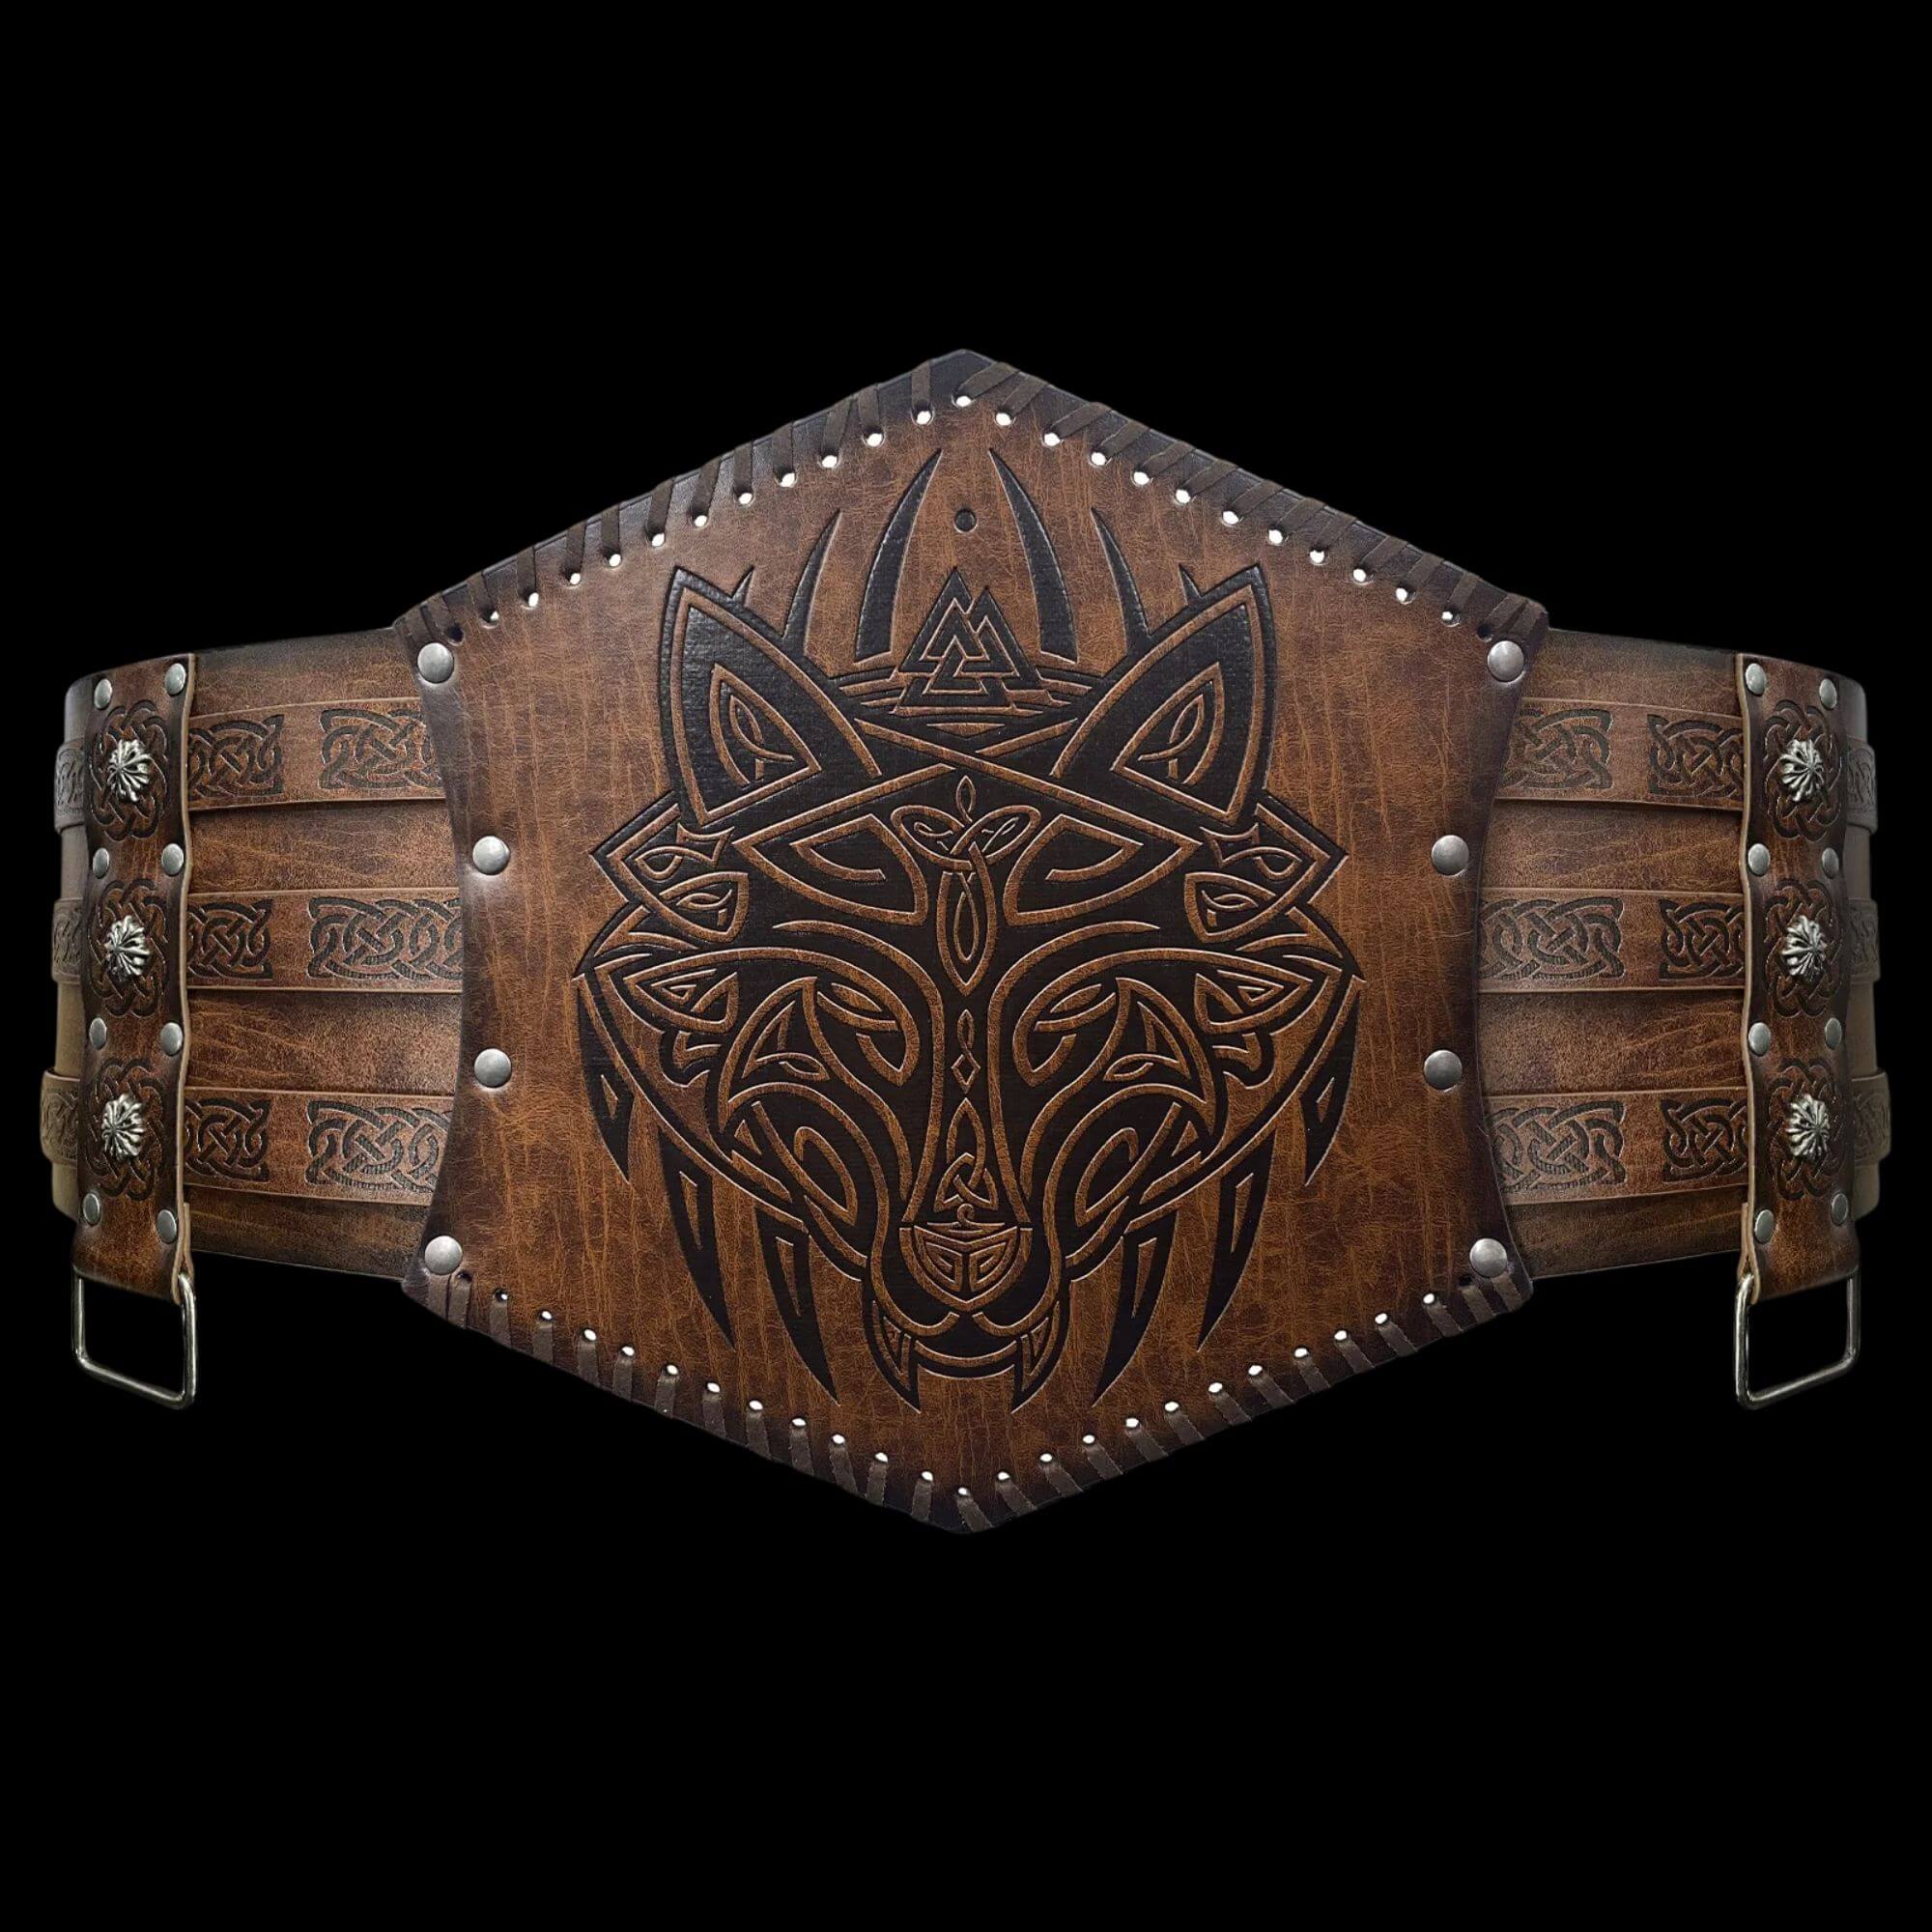 Leather Belt With Norse Symbols